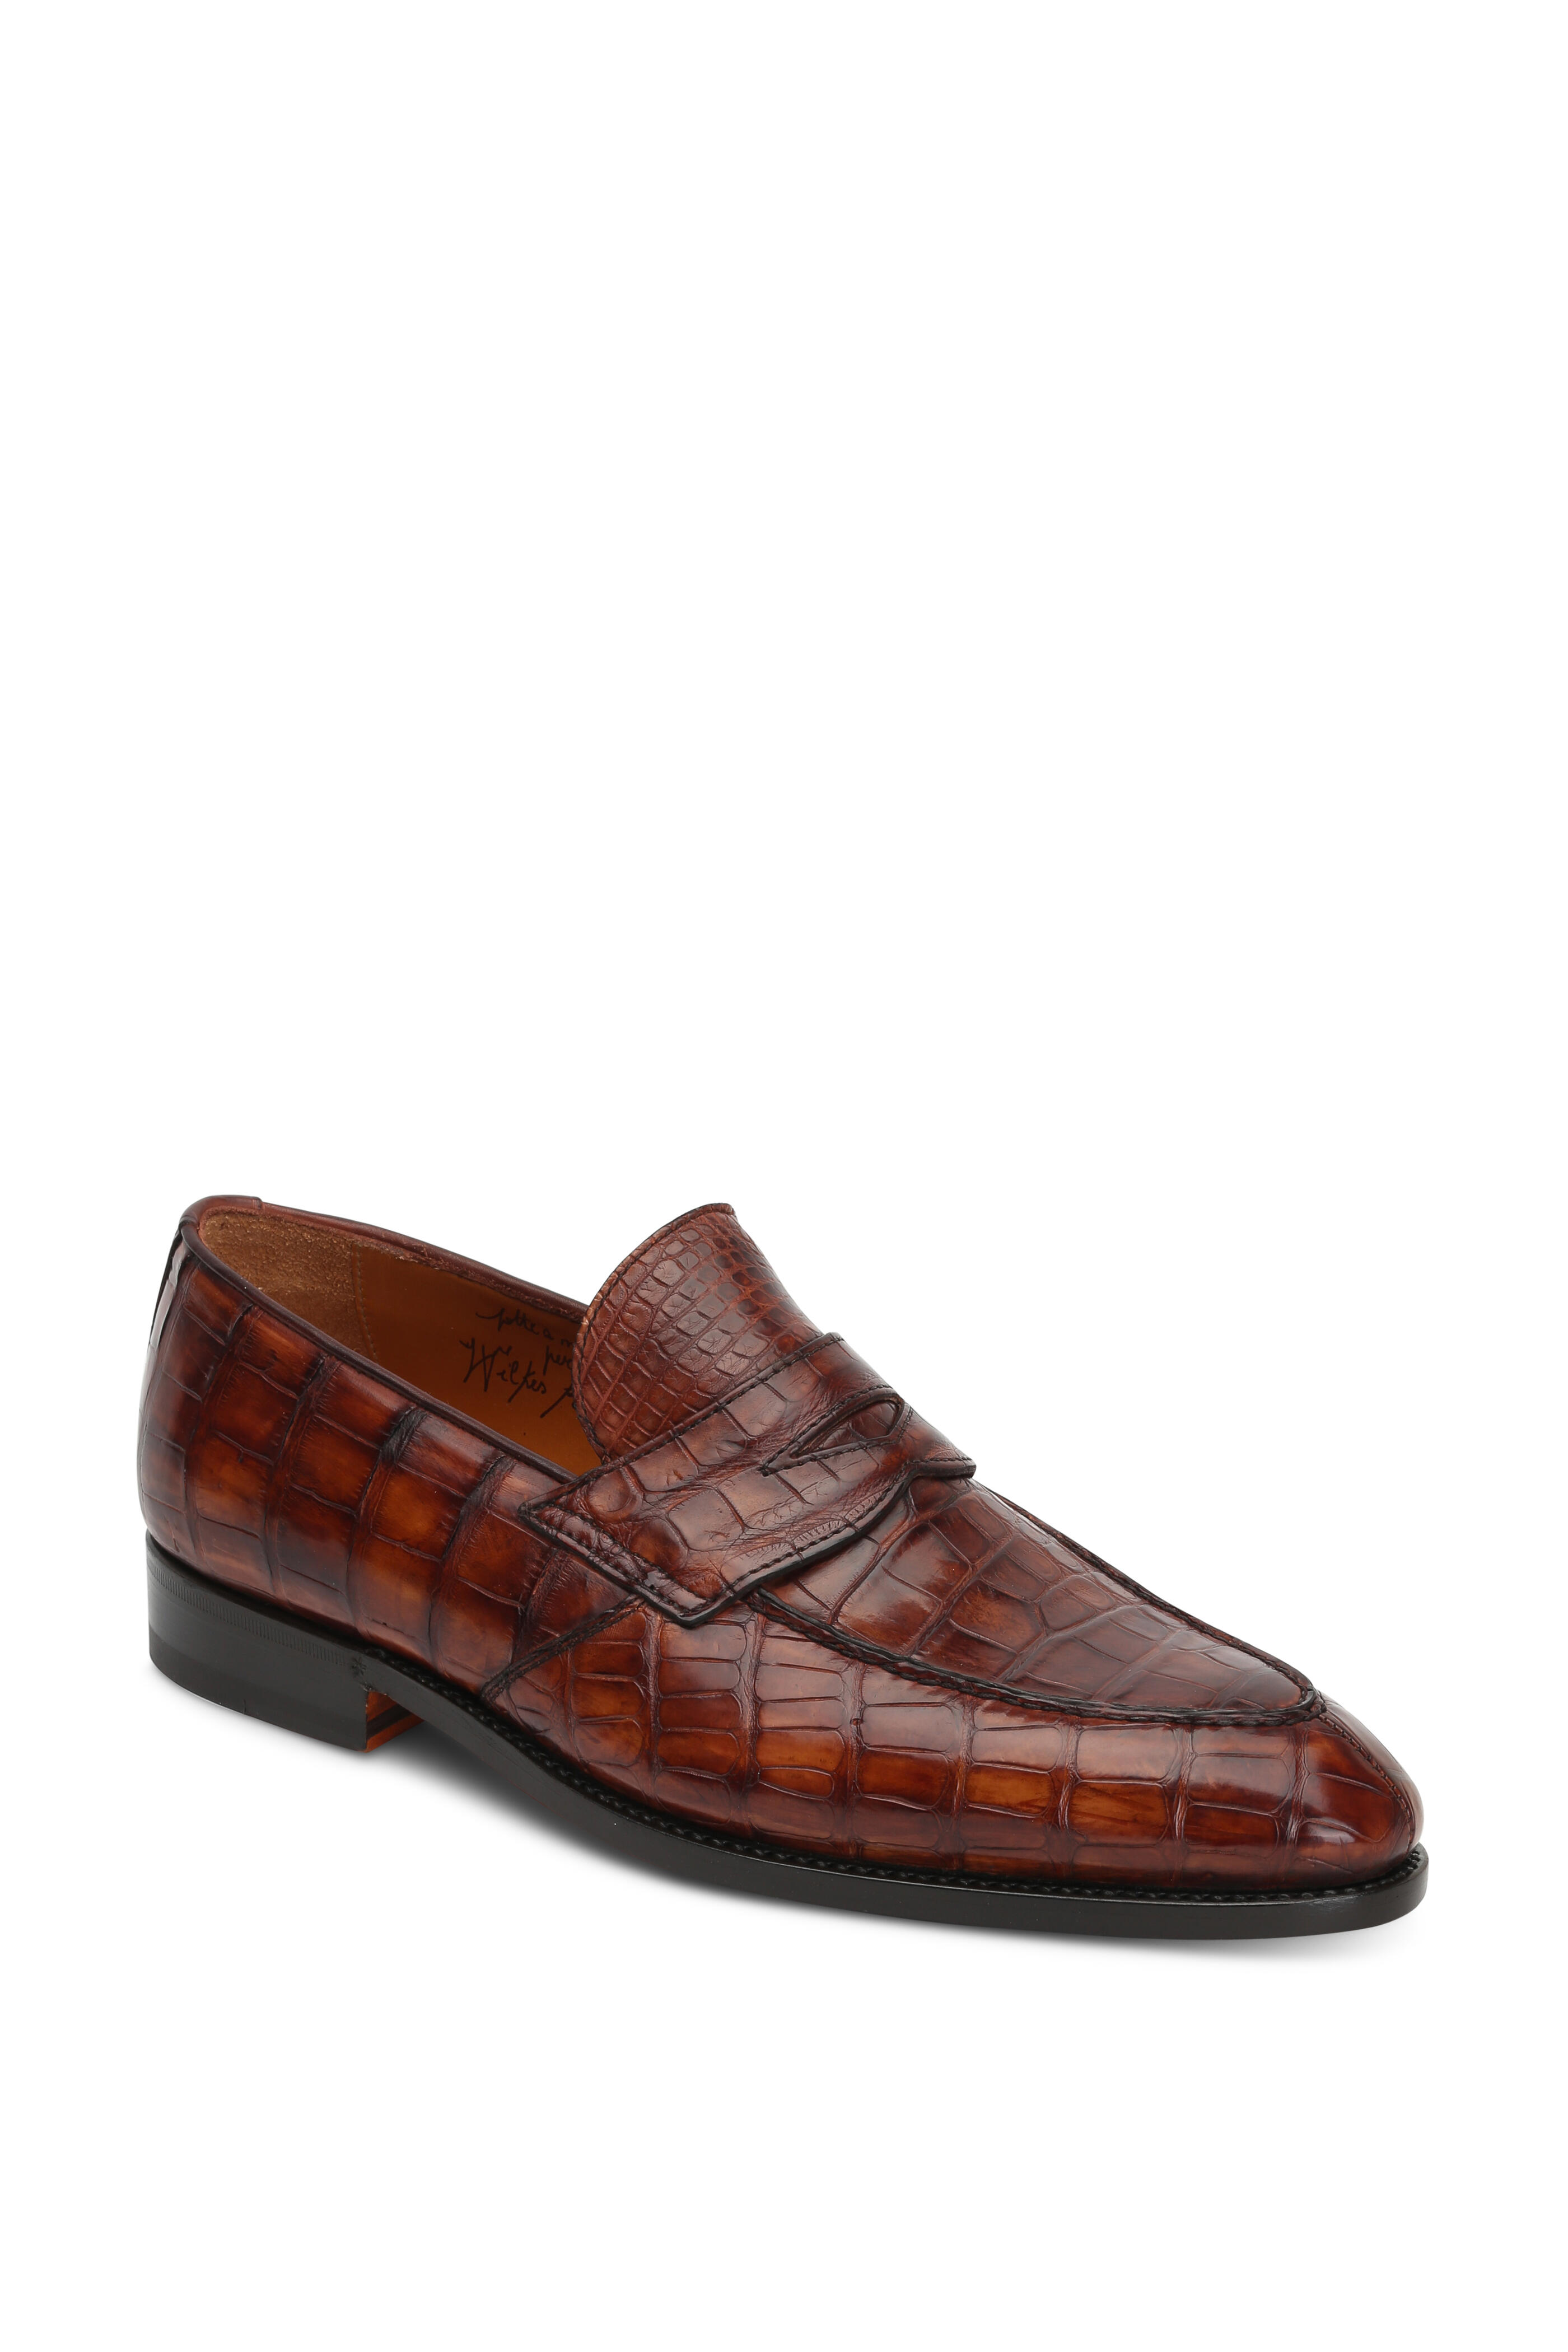 Pinch Penny Loafers - Chocolate Burnished Alligator